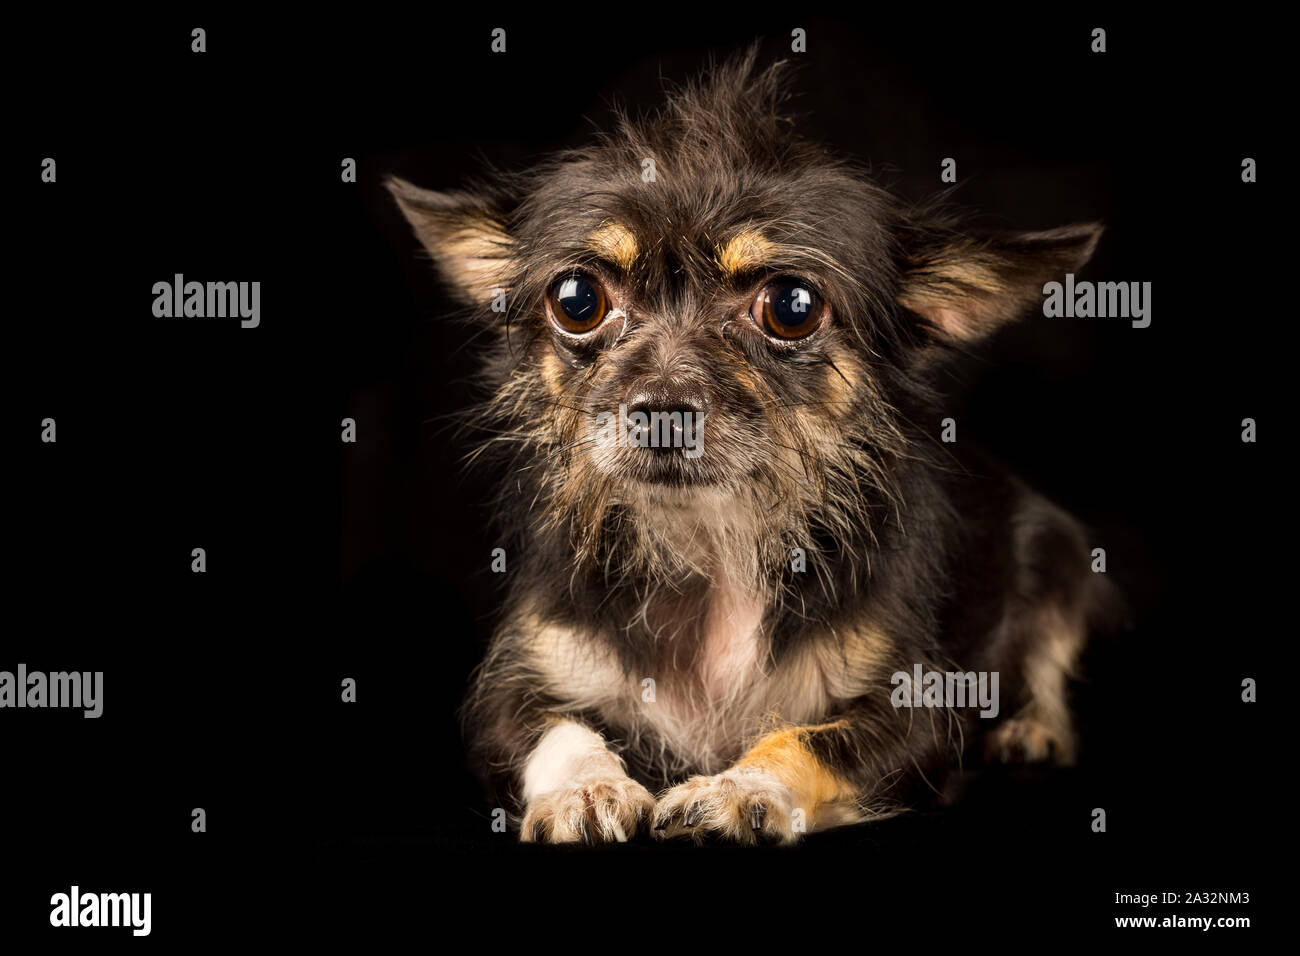 Chihuahua Yorkshire Terrier mongrel, sweet dog on black background Stock Photo